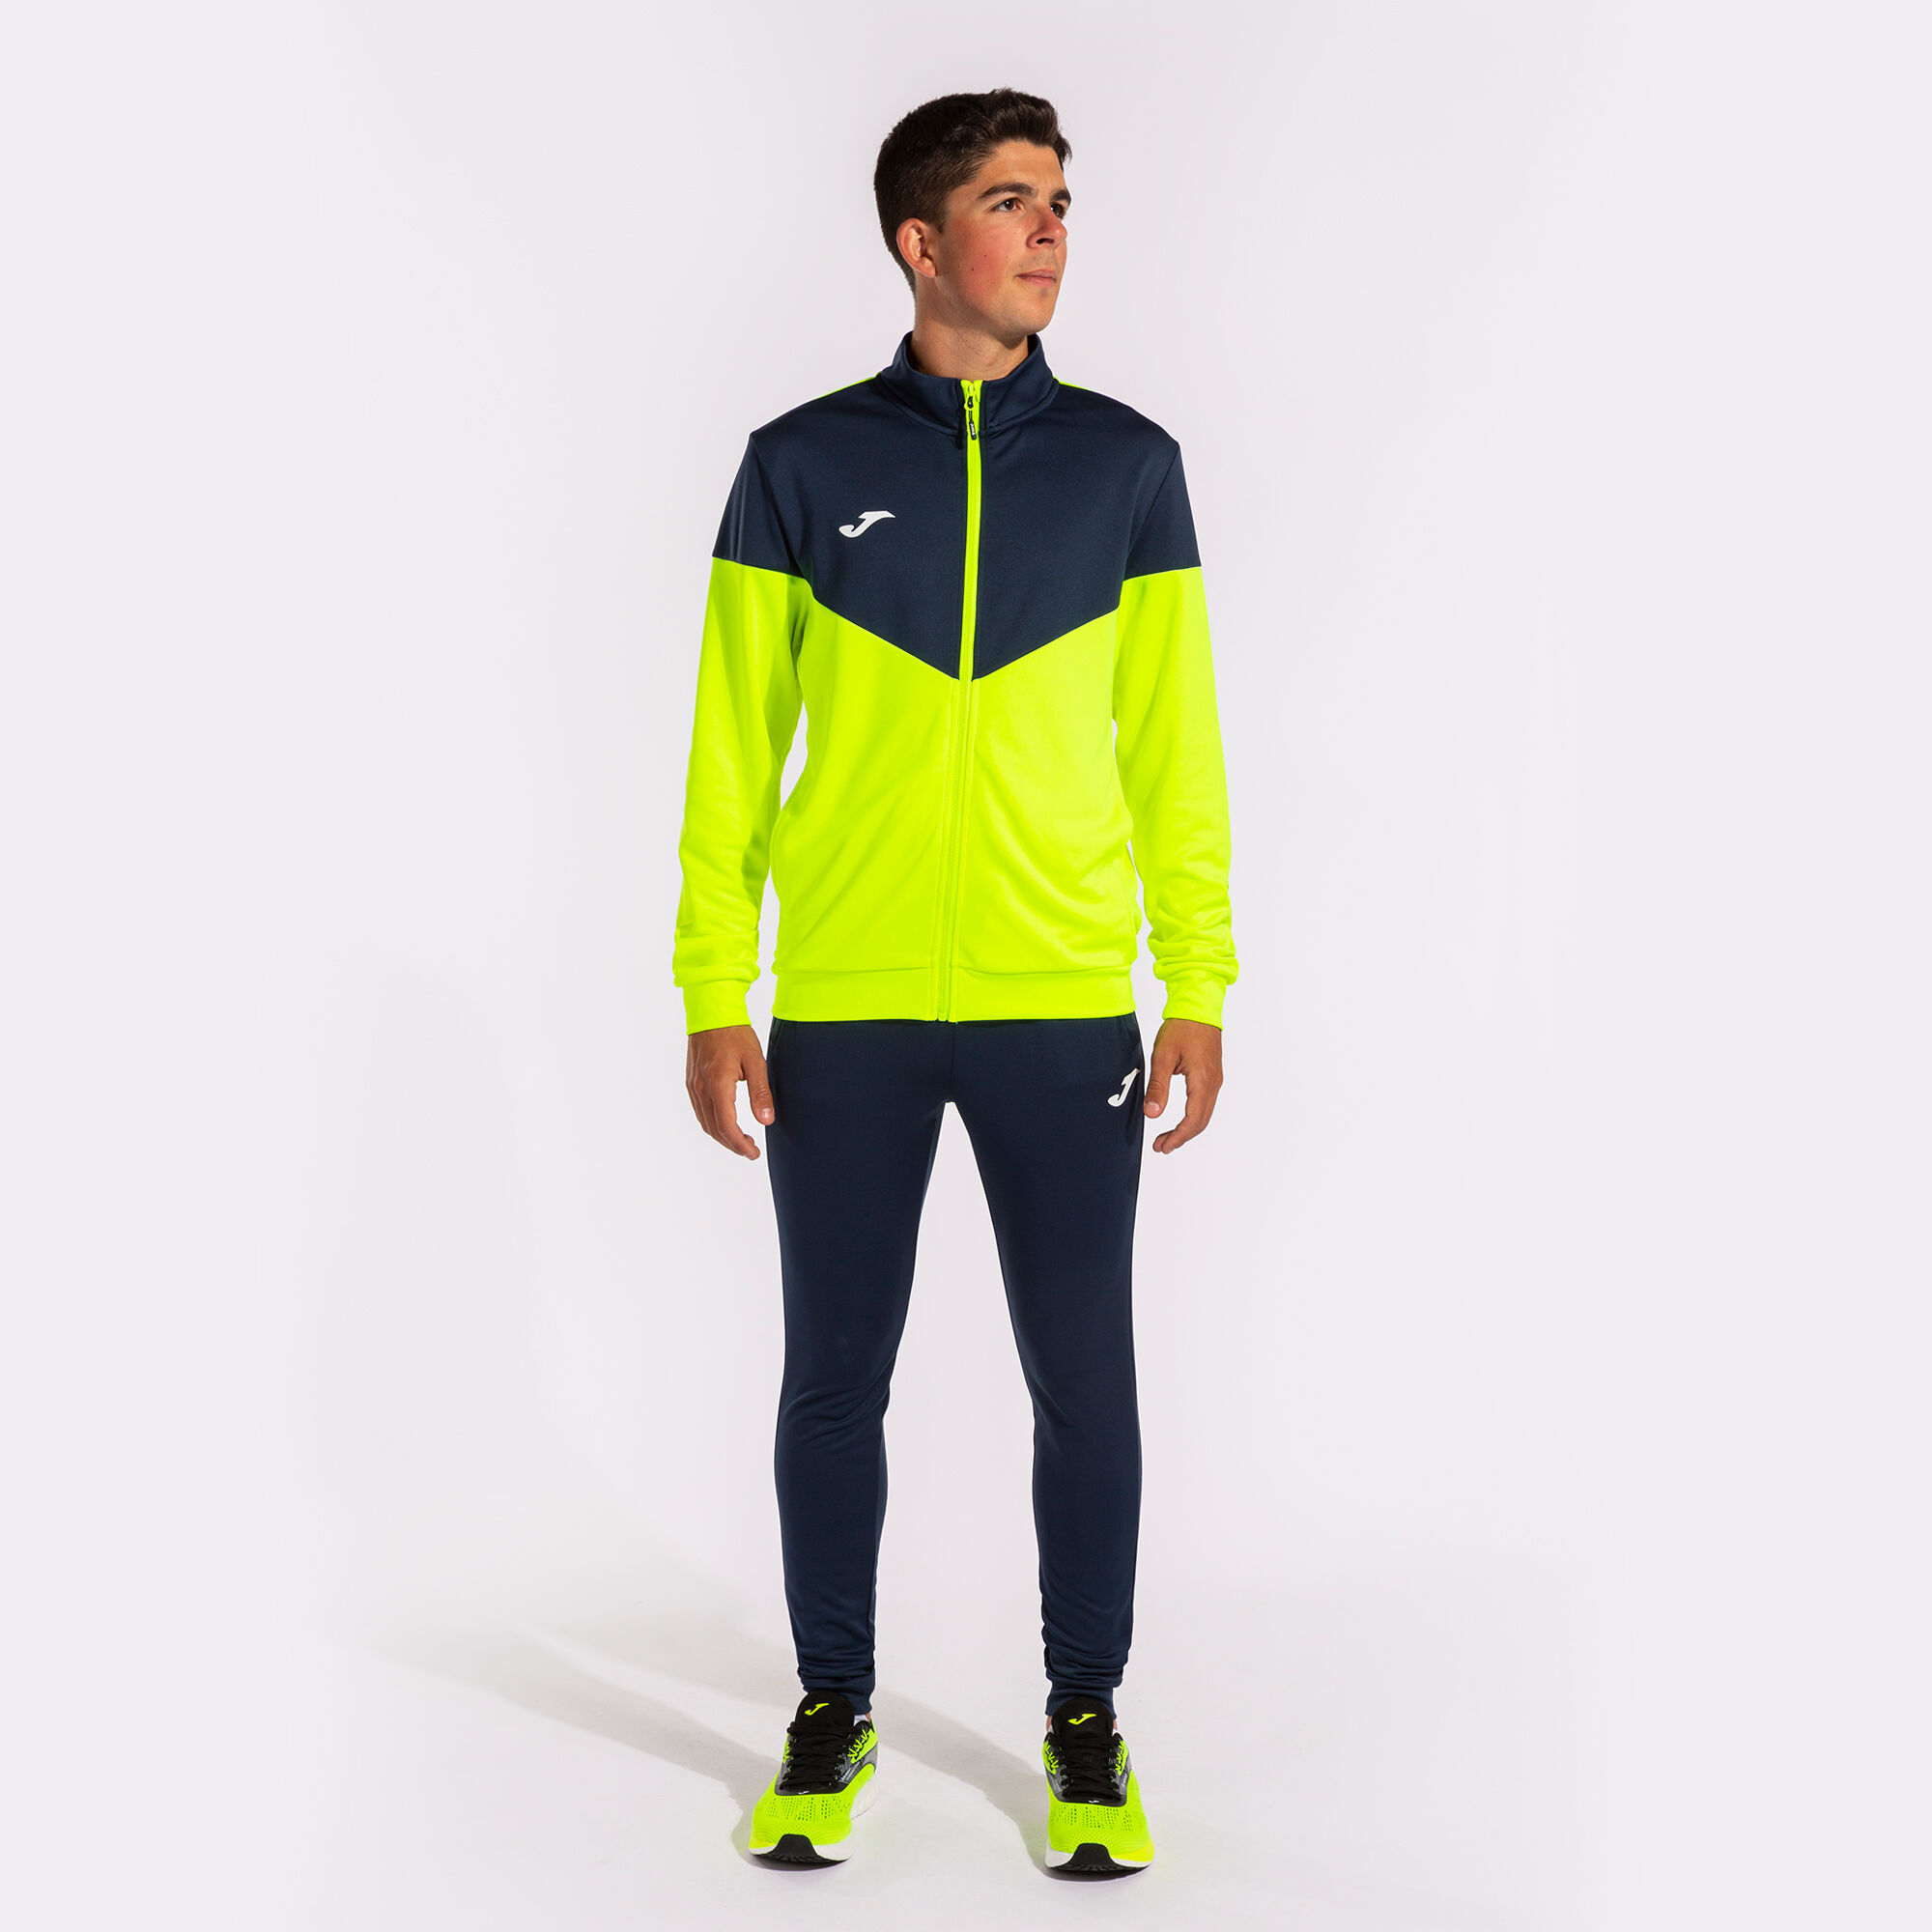 TRACKSUIT MAN OXFORD FLUORESCENT YELLOW NAVY BLUE